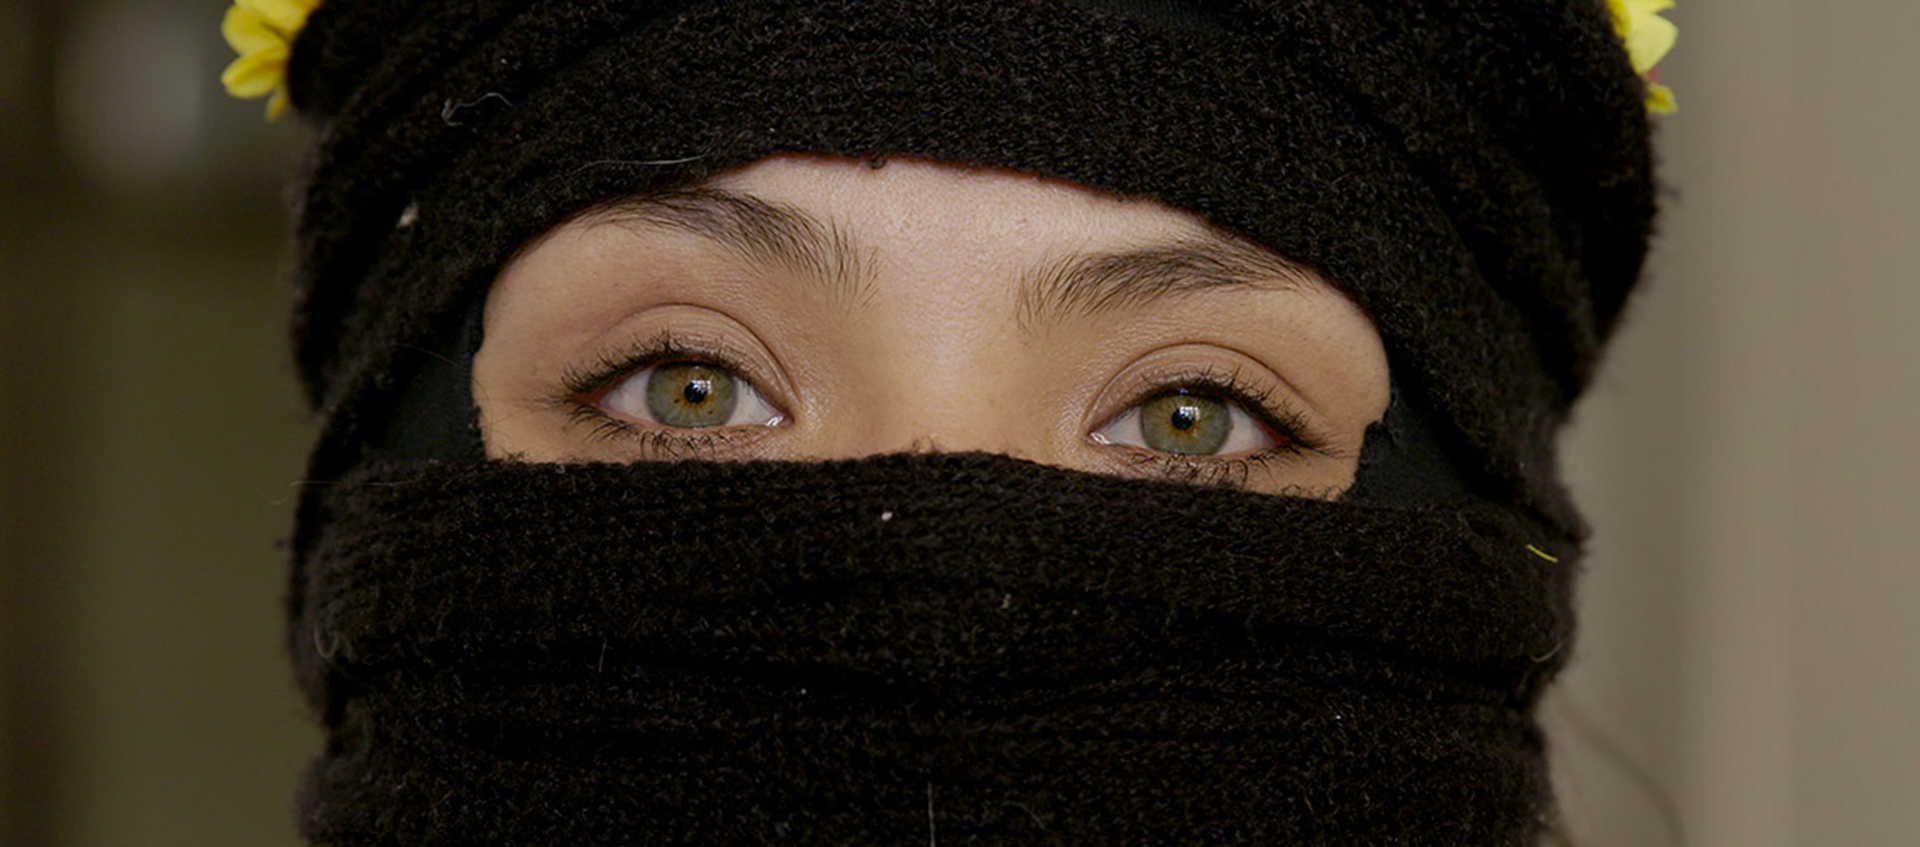 a person's face covered in black fabric except for the eyes